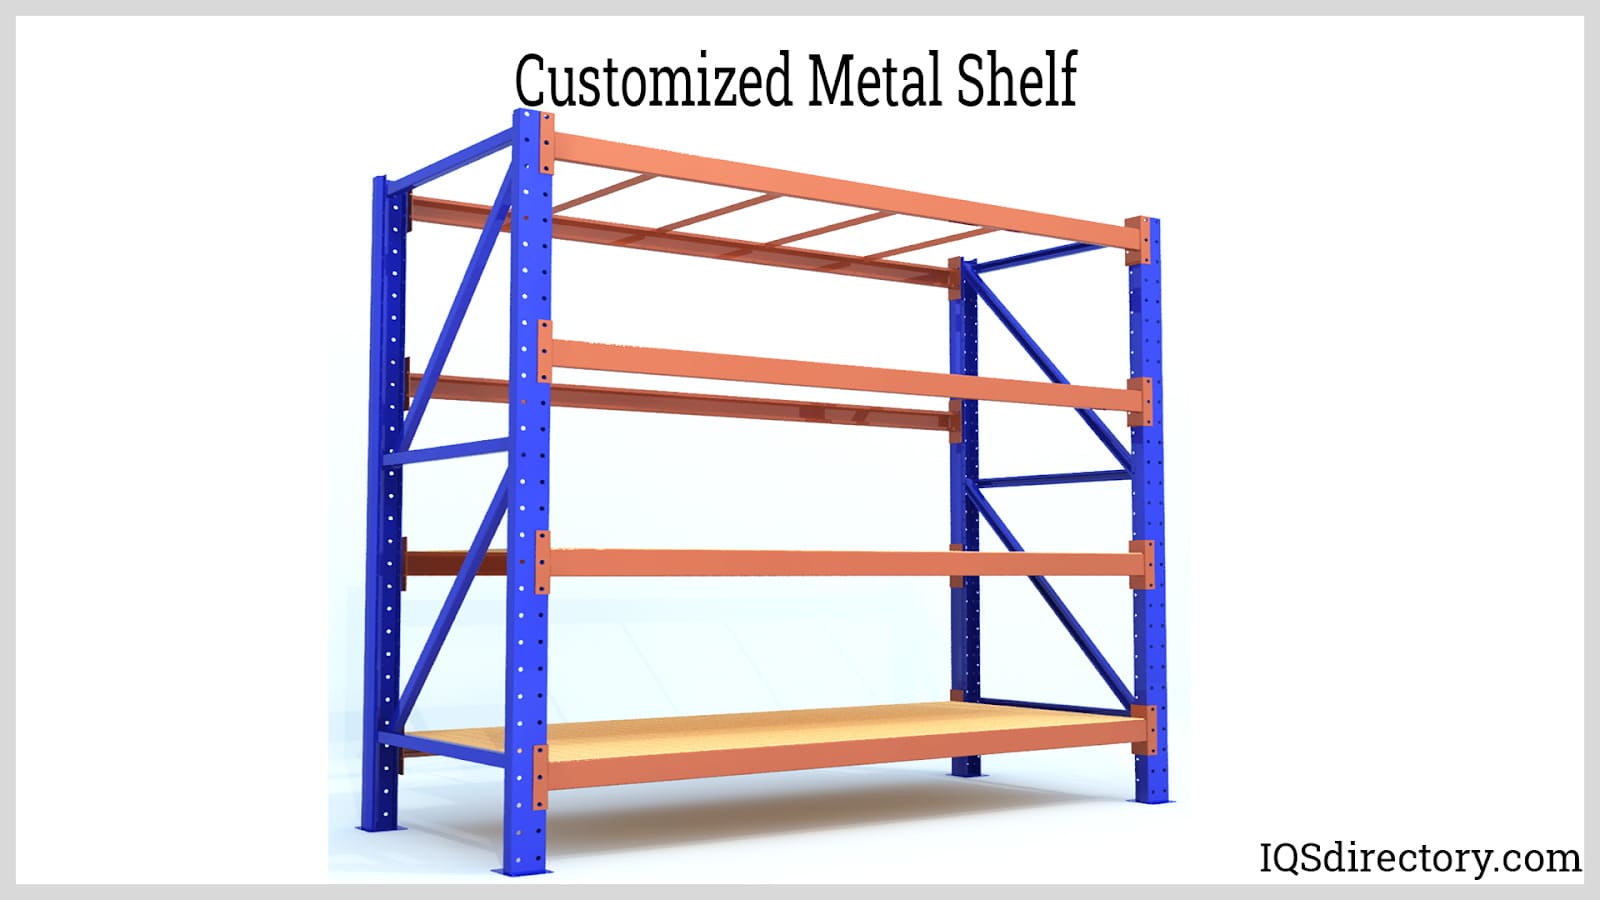 What Are the Main Benefits of Utilizing Stainless Steel Floating Shelves  from MarlinSteel?